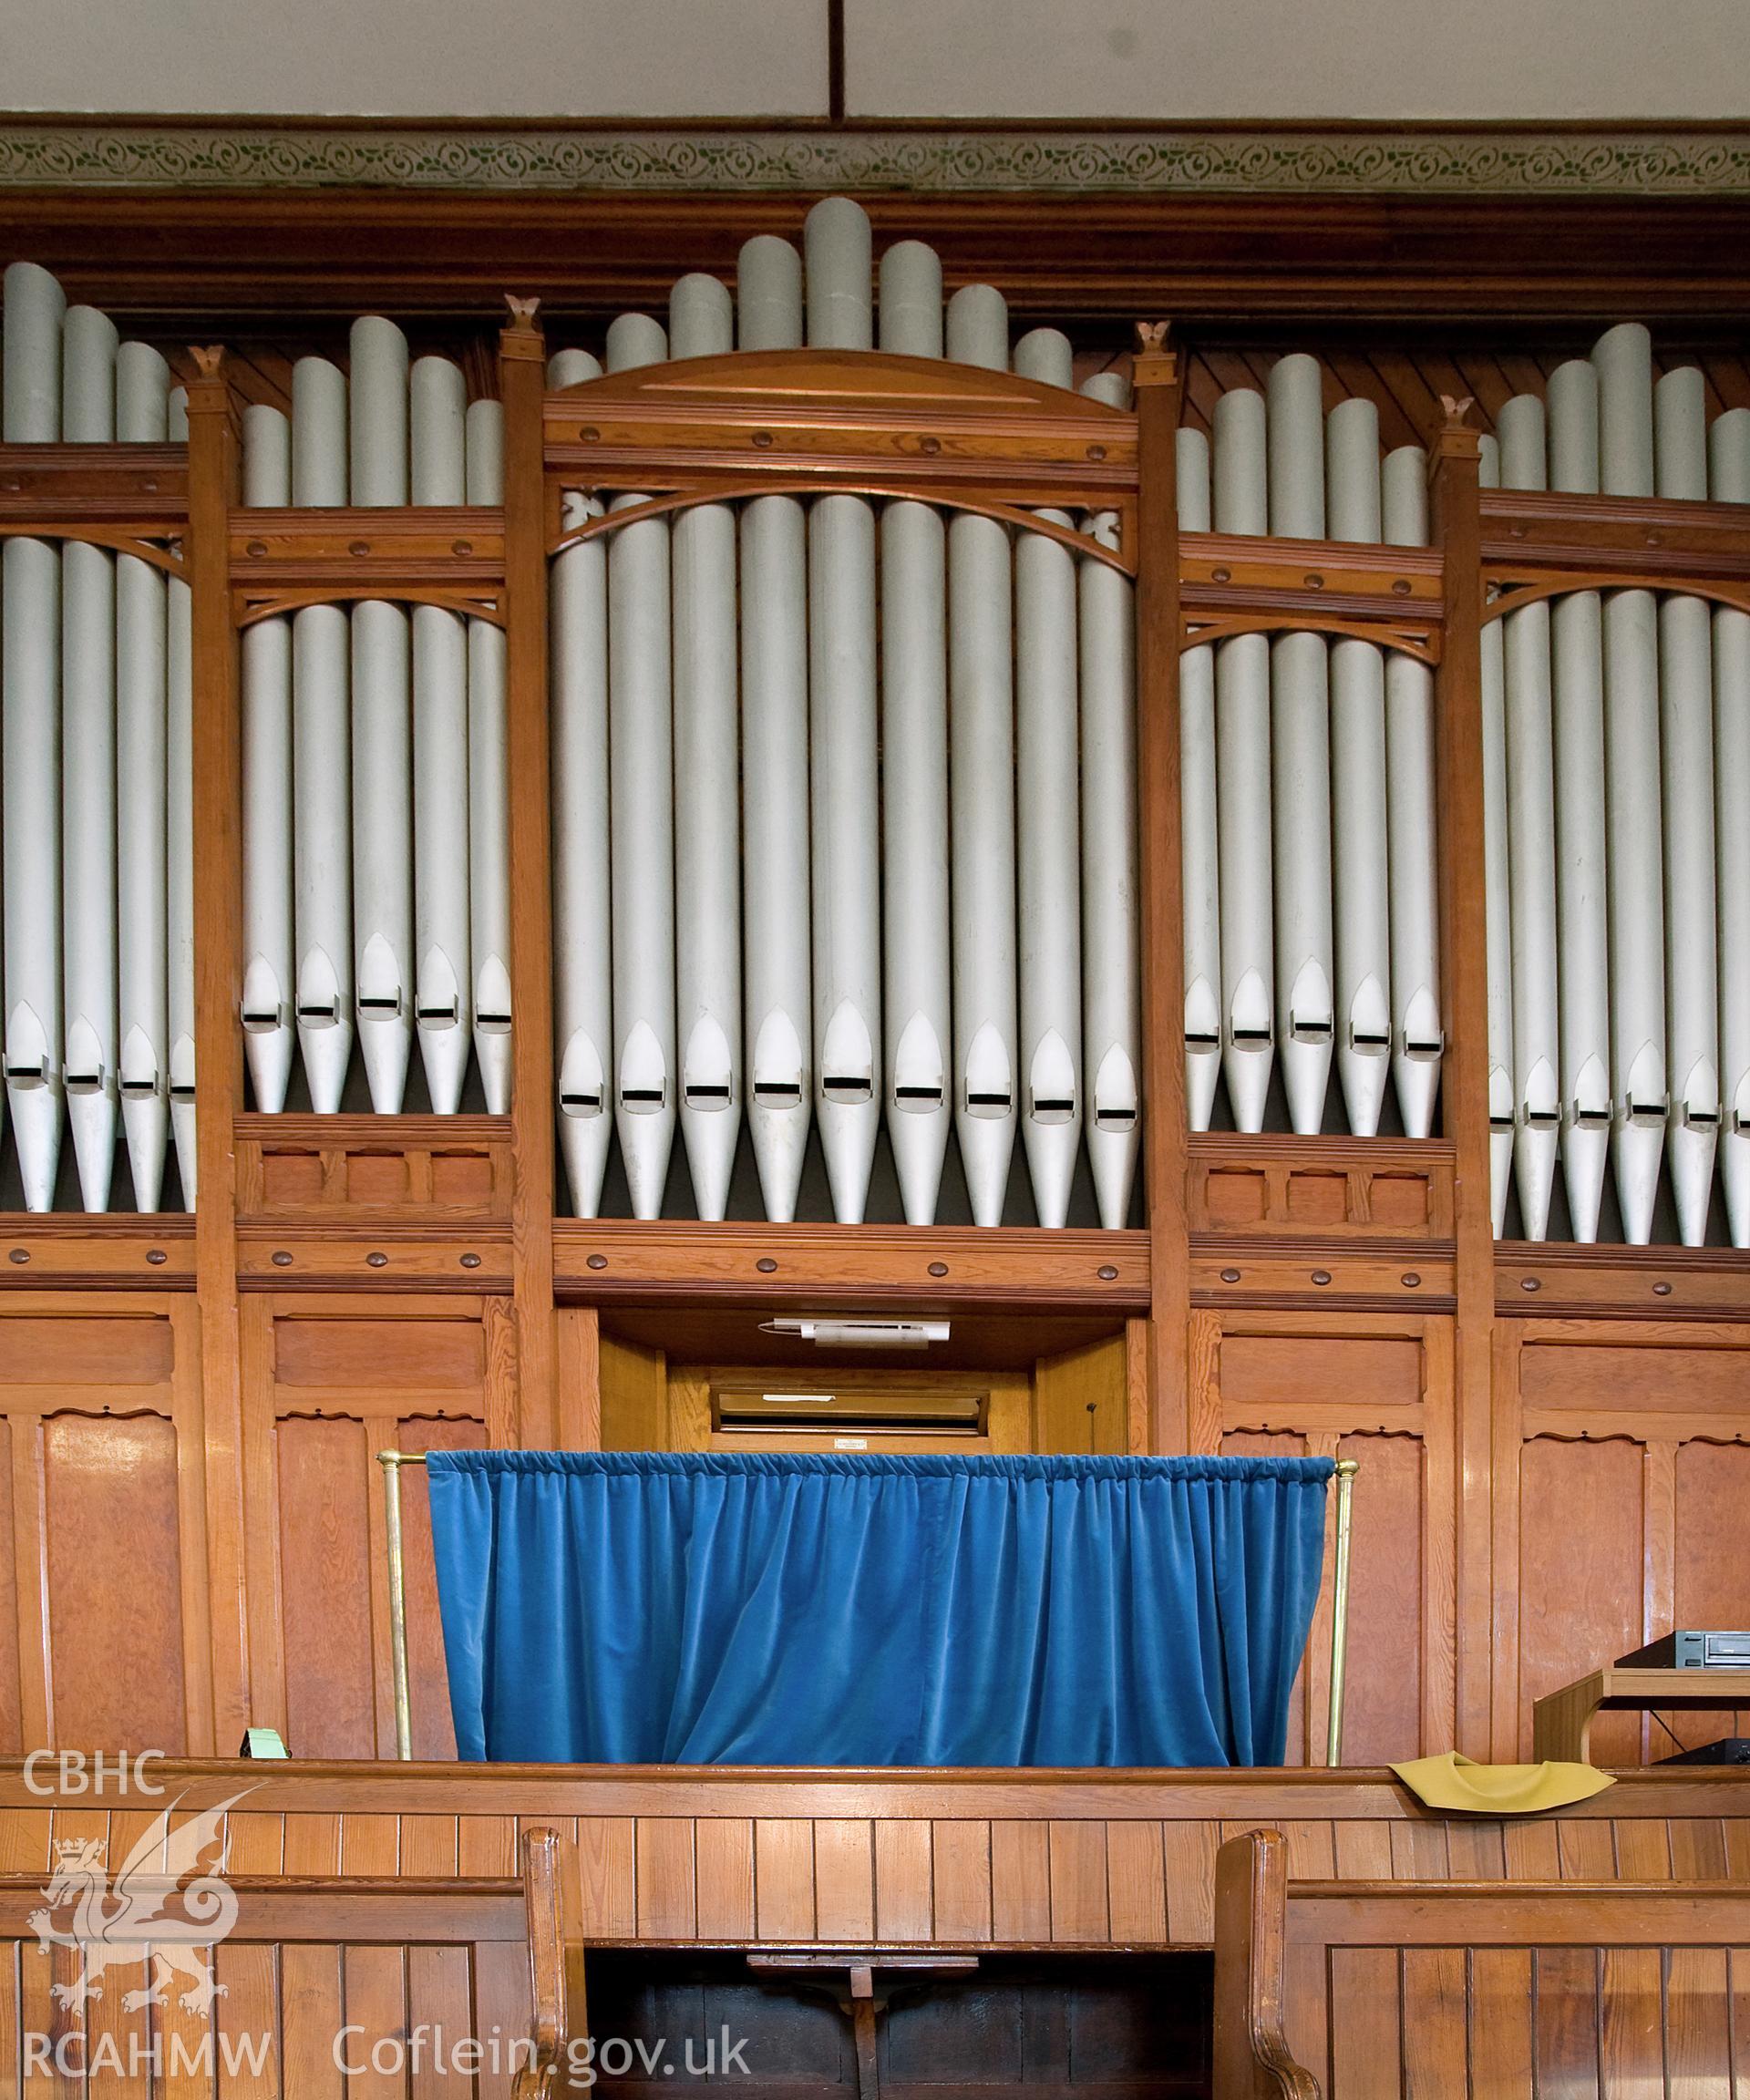 Hanbury Road baptist chapel, Bargoed, digital colour photograph showing the organ which was installed in 1933, received in the course of Emergency Recording case ref no RCS2/1/2247.